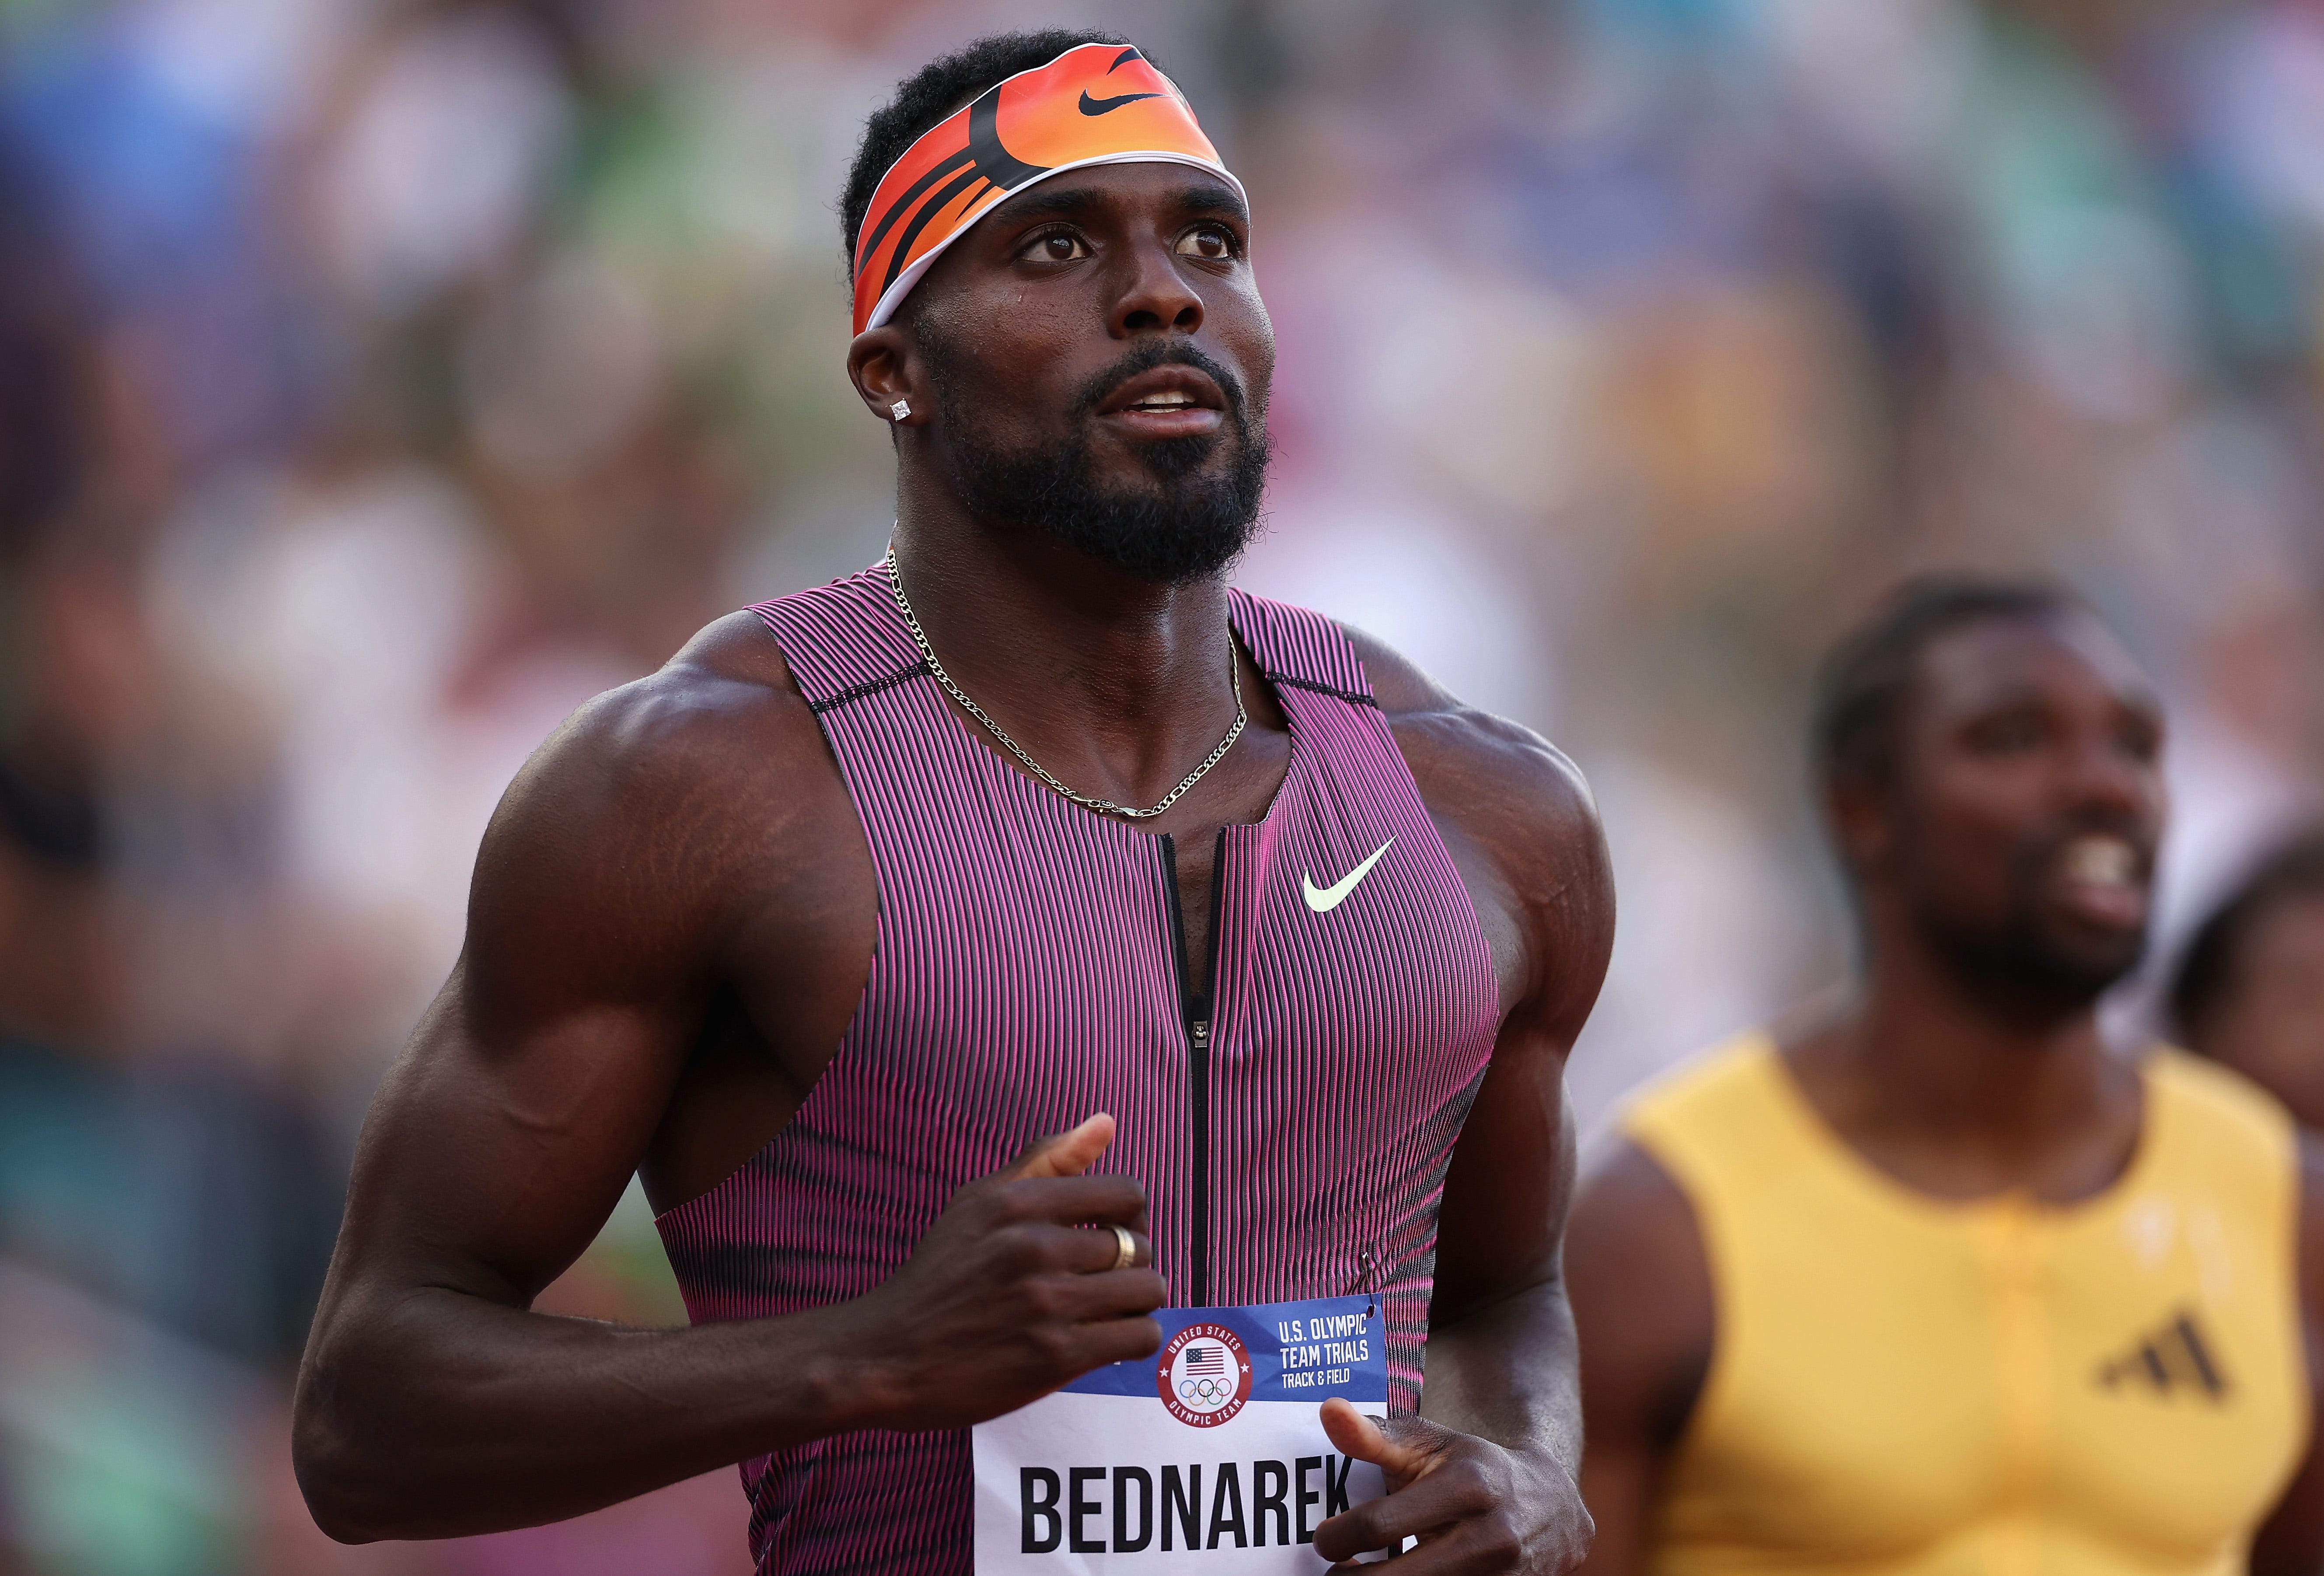 Who is Kenny Bednarek? What to know about Rice Lake, Wisconsin, native competing in two events at 2024 Paris Olympics